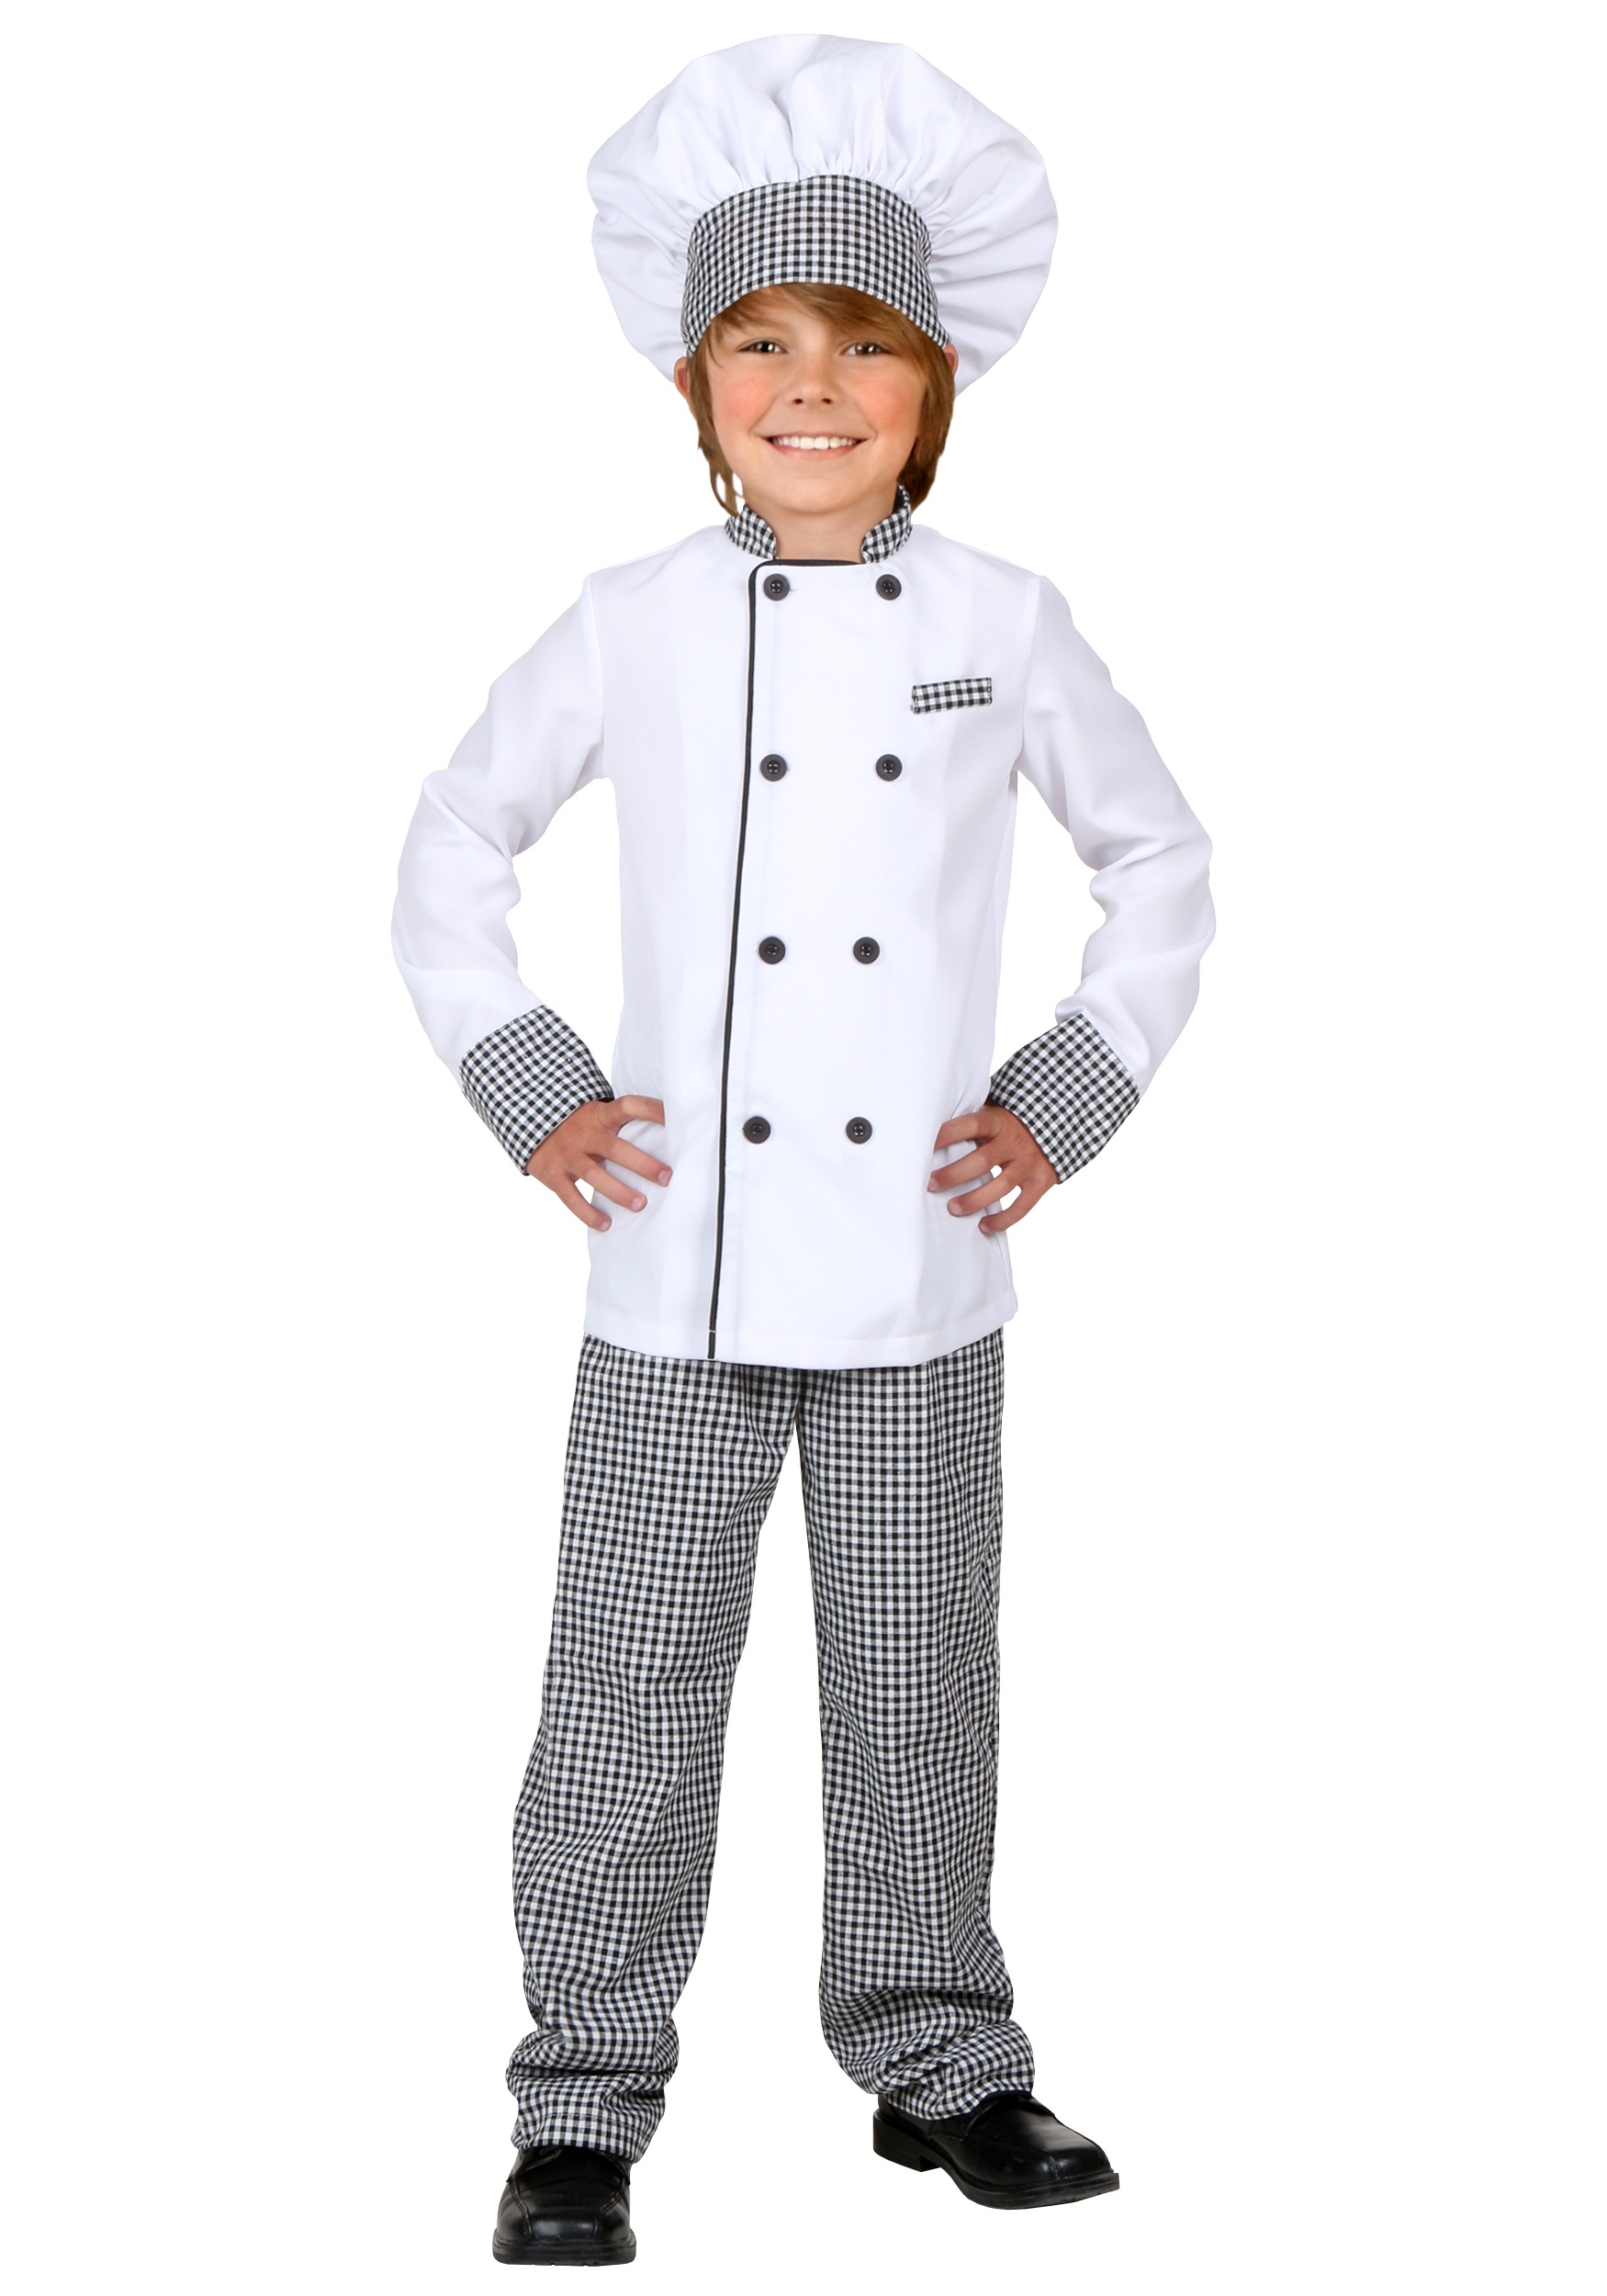 Chef Child Costume | Exclusive | Made By Us Costume